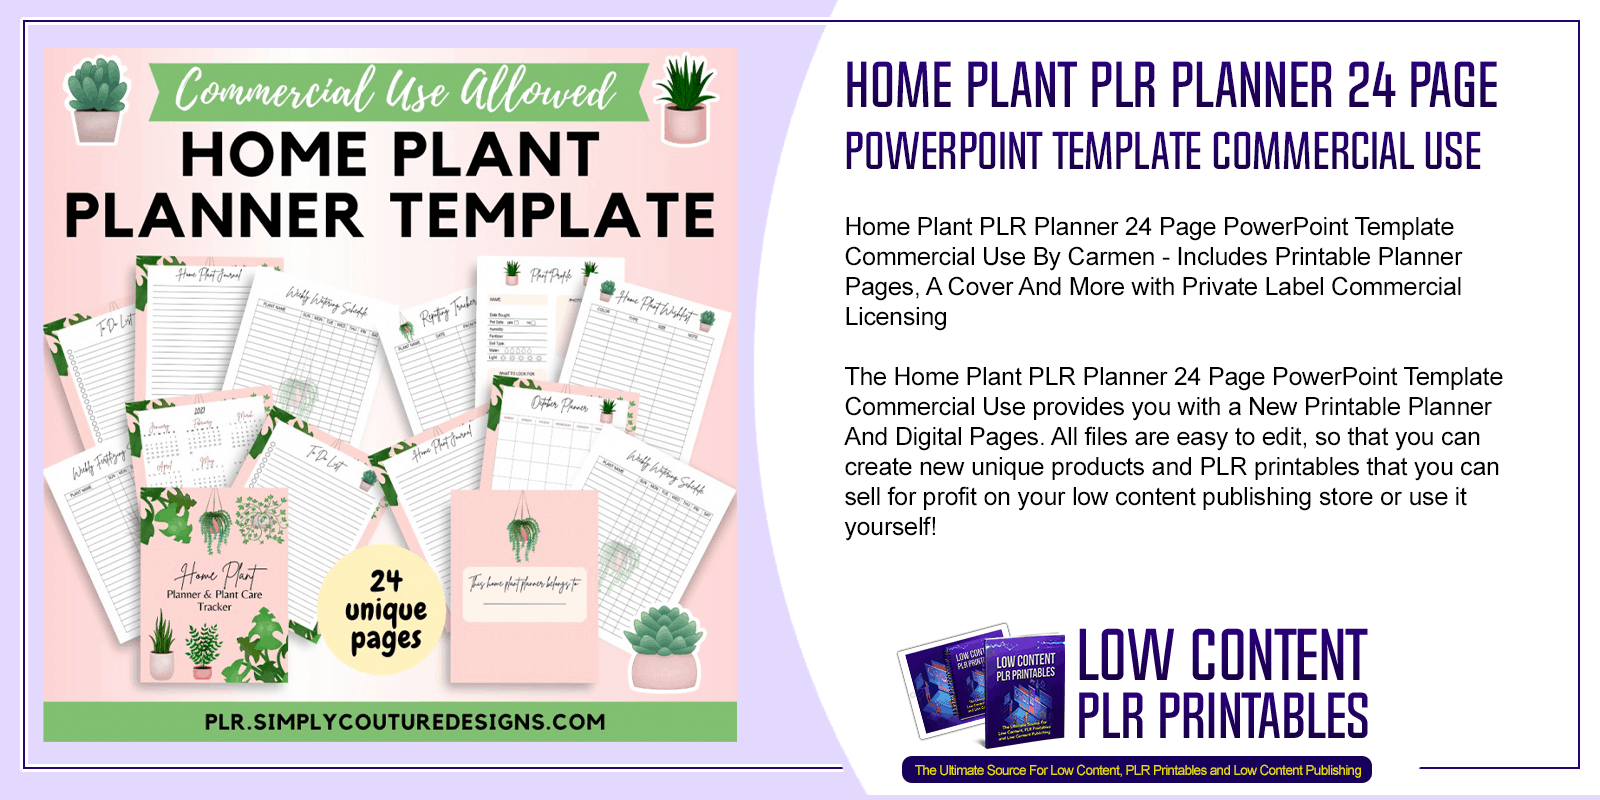 Home Plant PLR Planner 24 Page PowerPoint Template Commercial Use